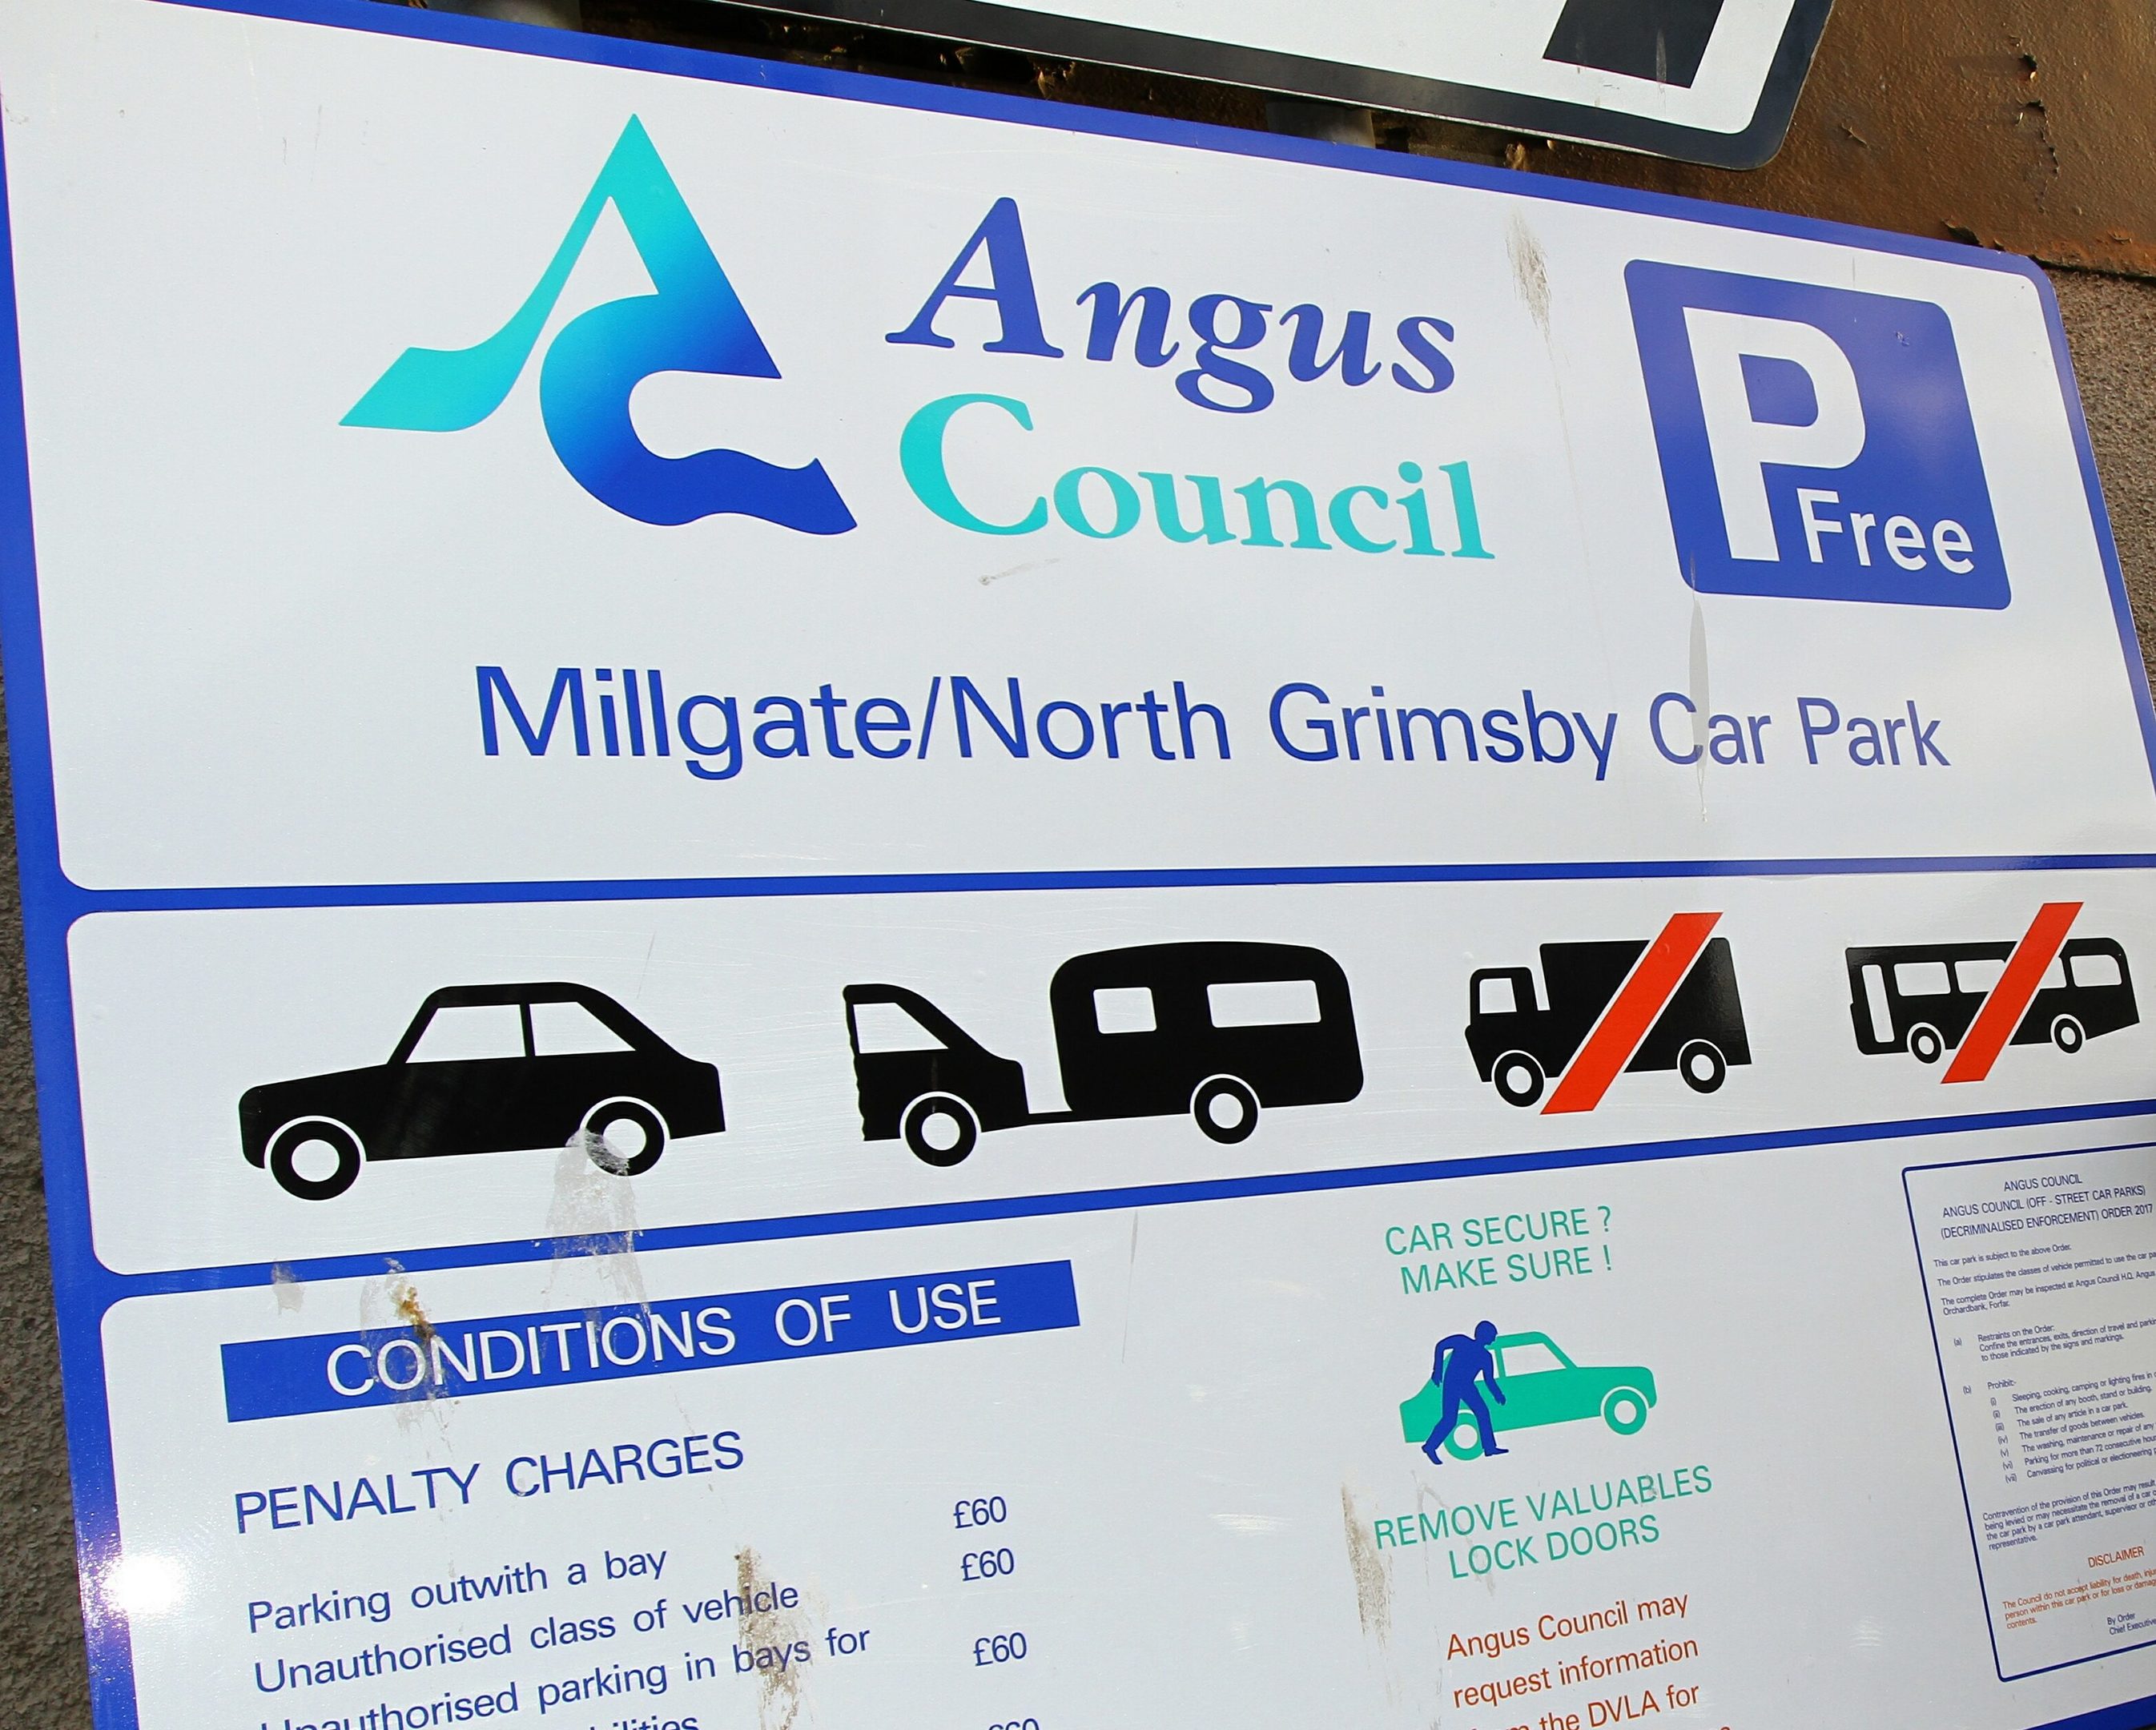 Angus parking charges were brought back in November.